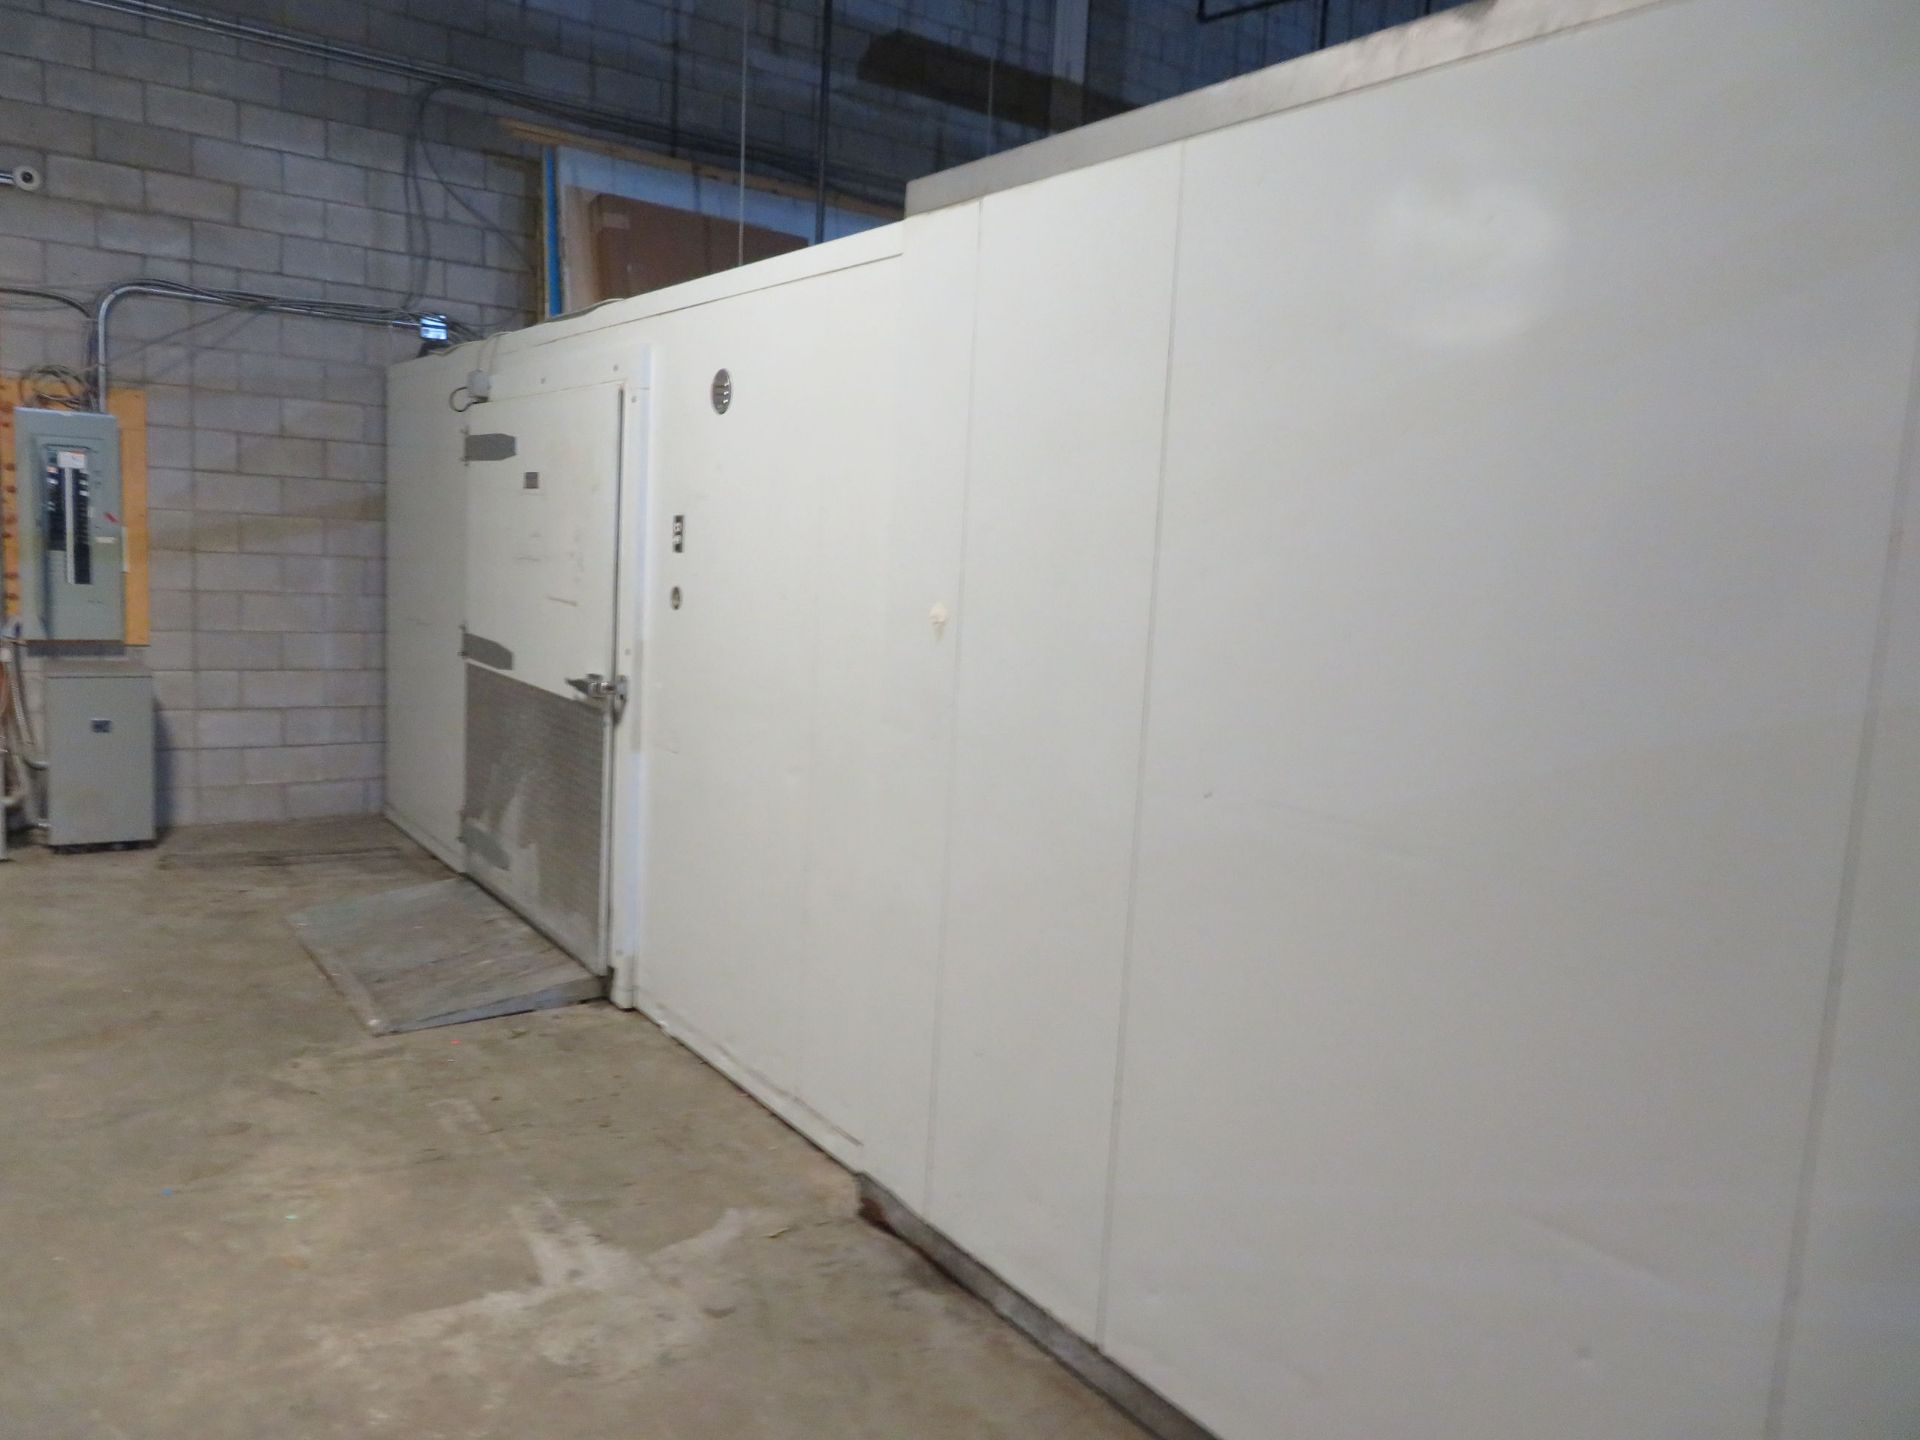 Walk in coolers including (1) Freezer with floor approx. 188"w x 218"d x 96"h / (1) Freezer with - Image 13 of 18